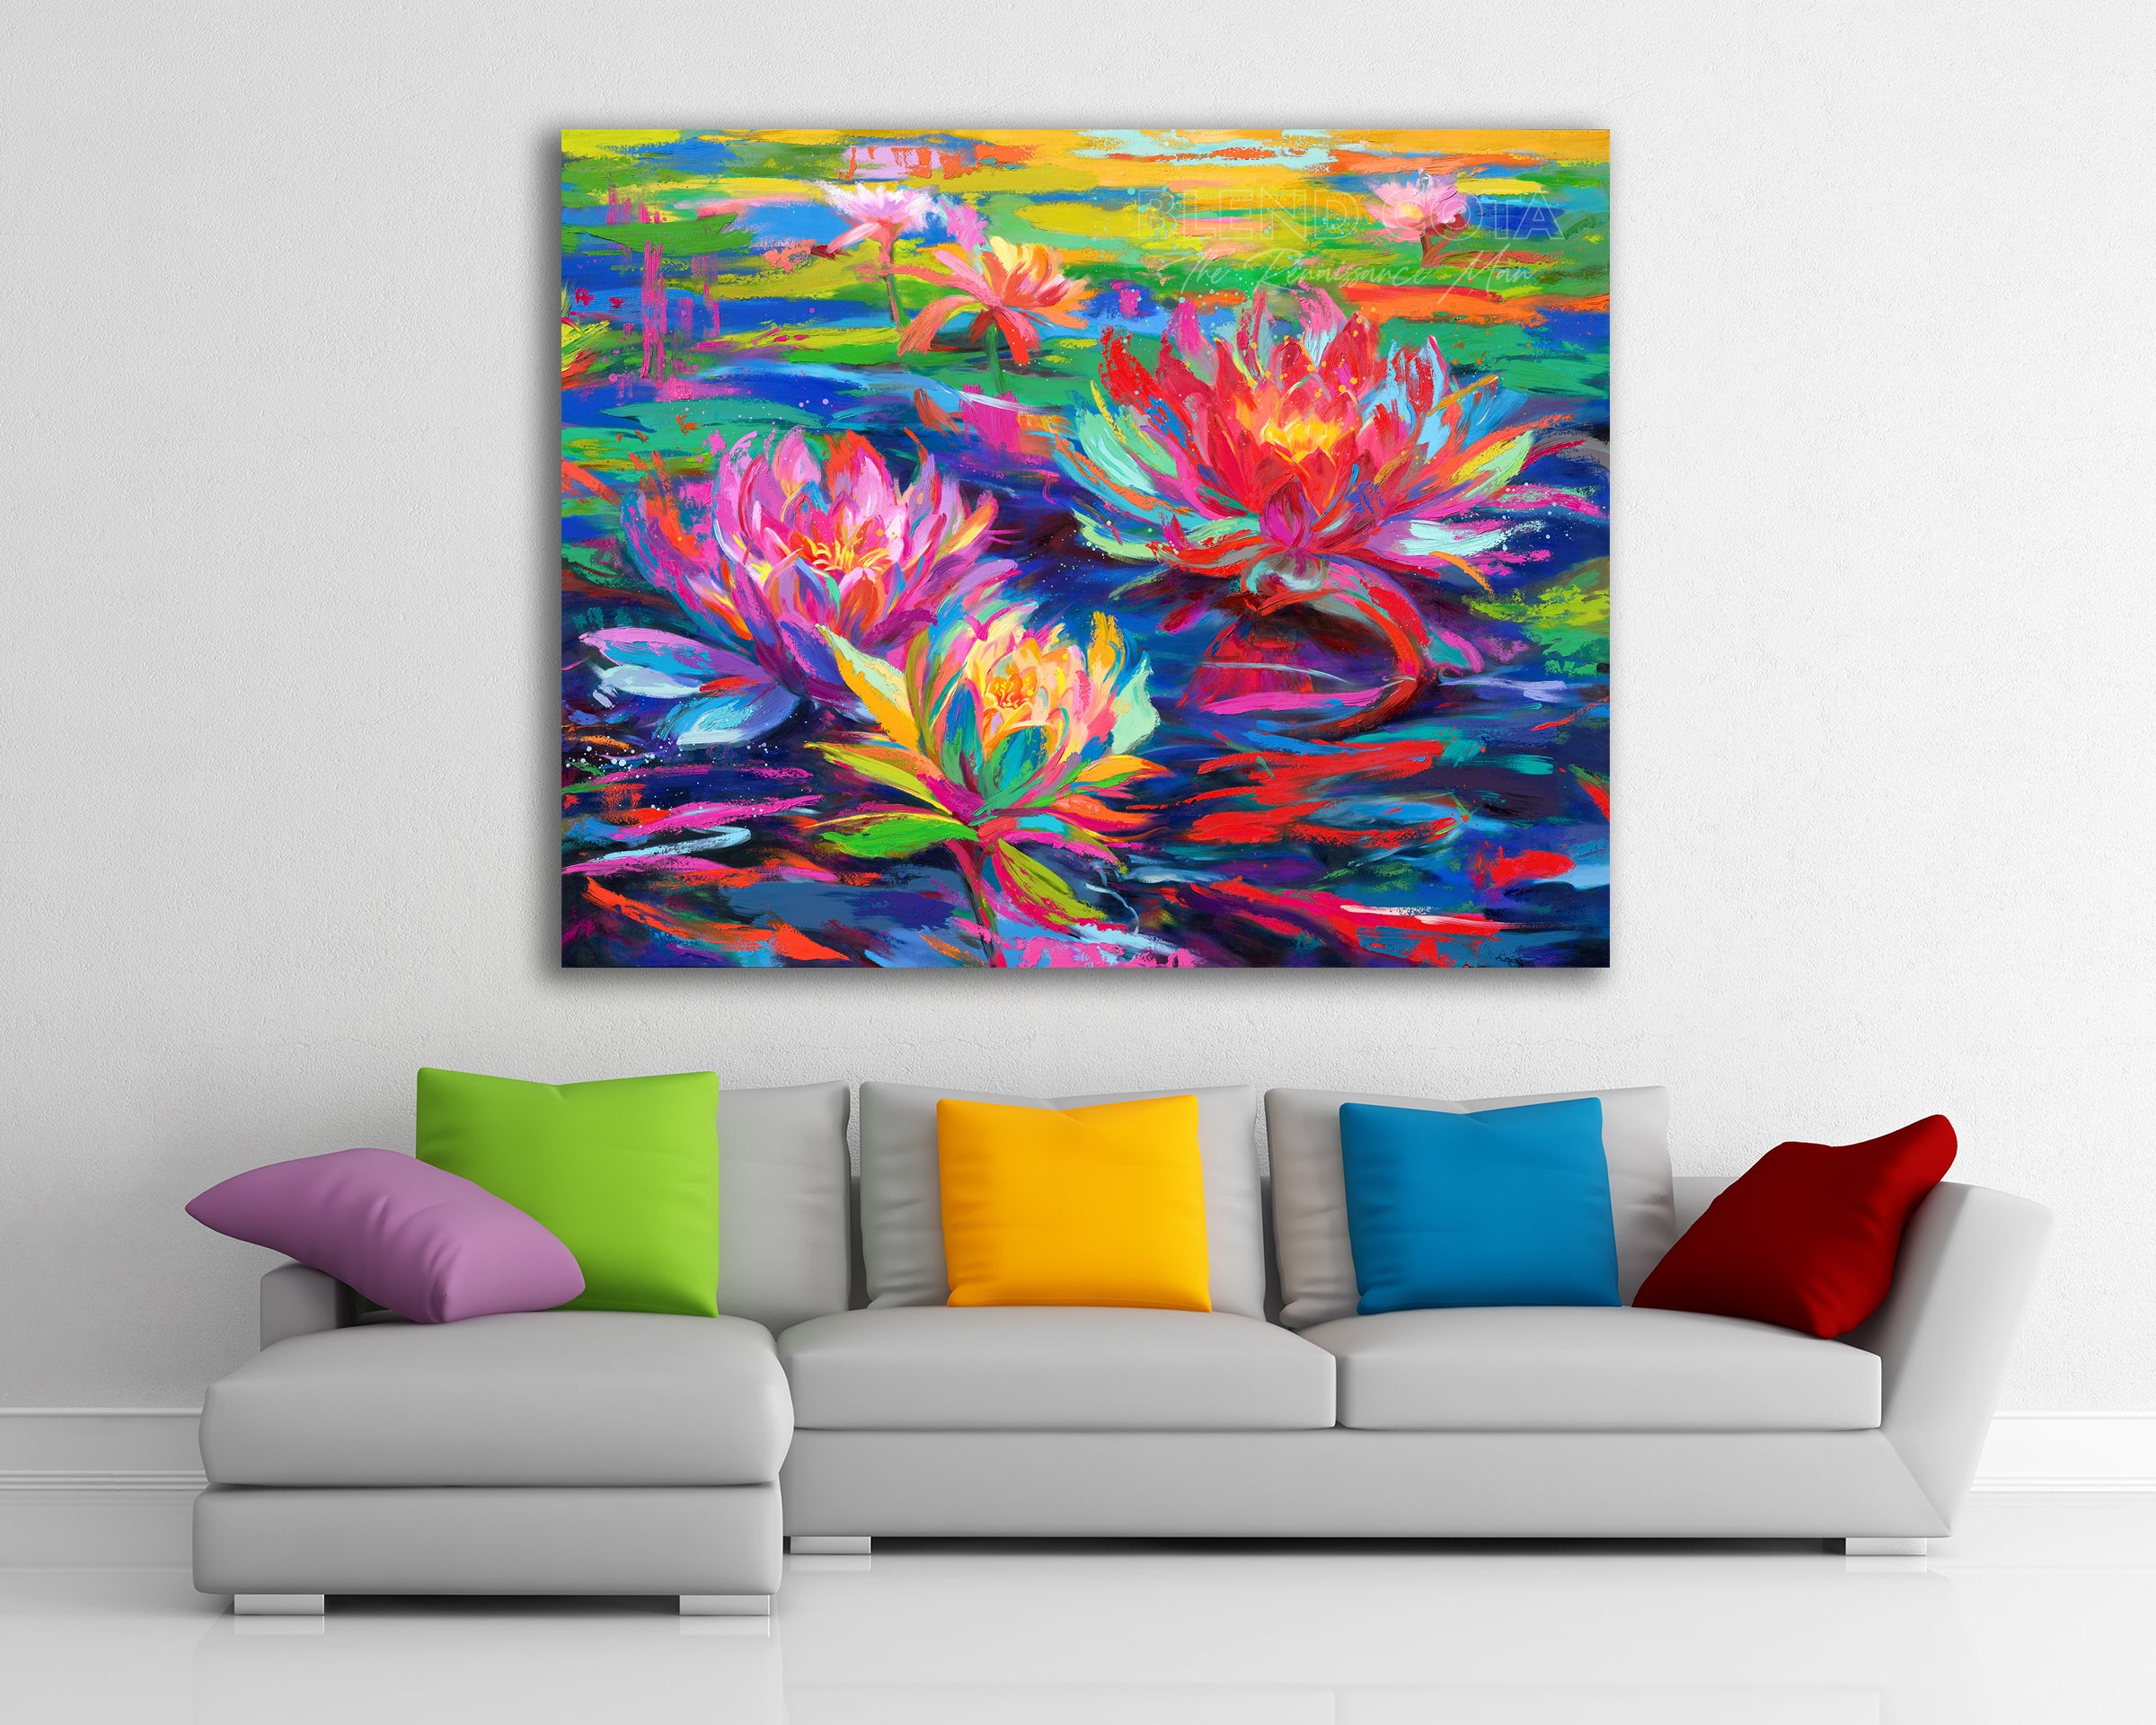 Room setting of Limited edition painting on canvas of red, pink and yellow water lilies blooming in a pond of lily pads, abundant and vibrant flowers in colorful brushstrokes, color expressionism style.